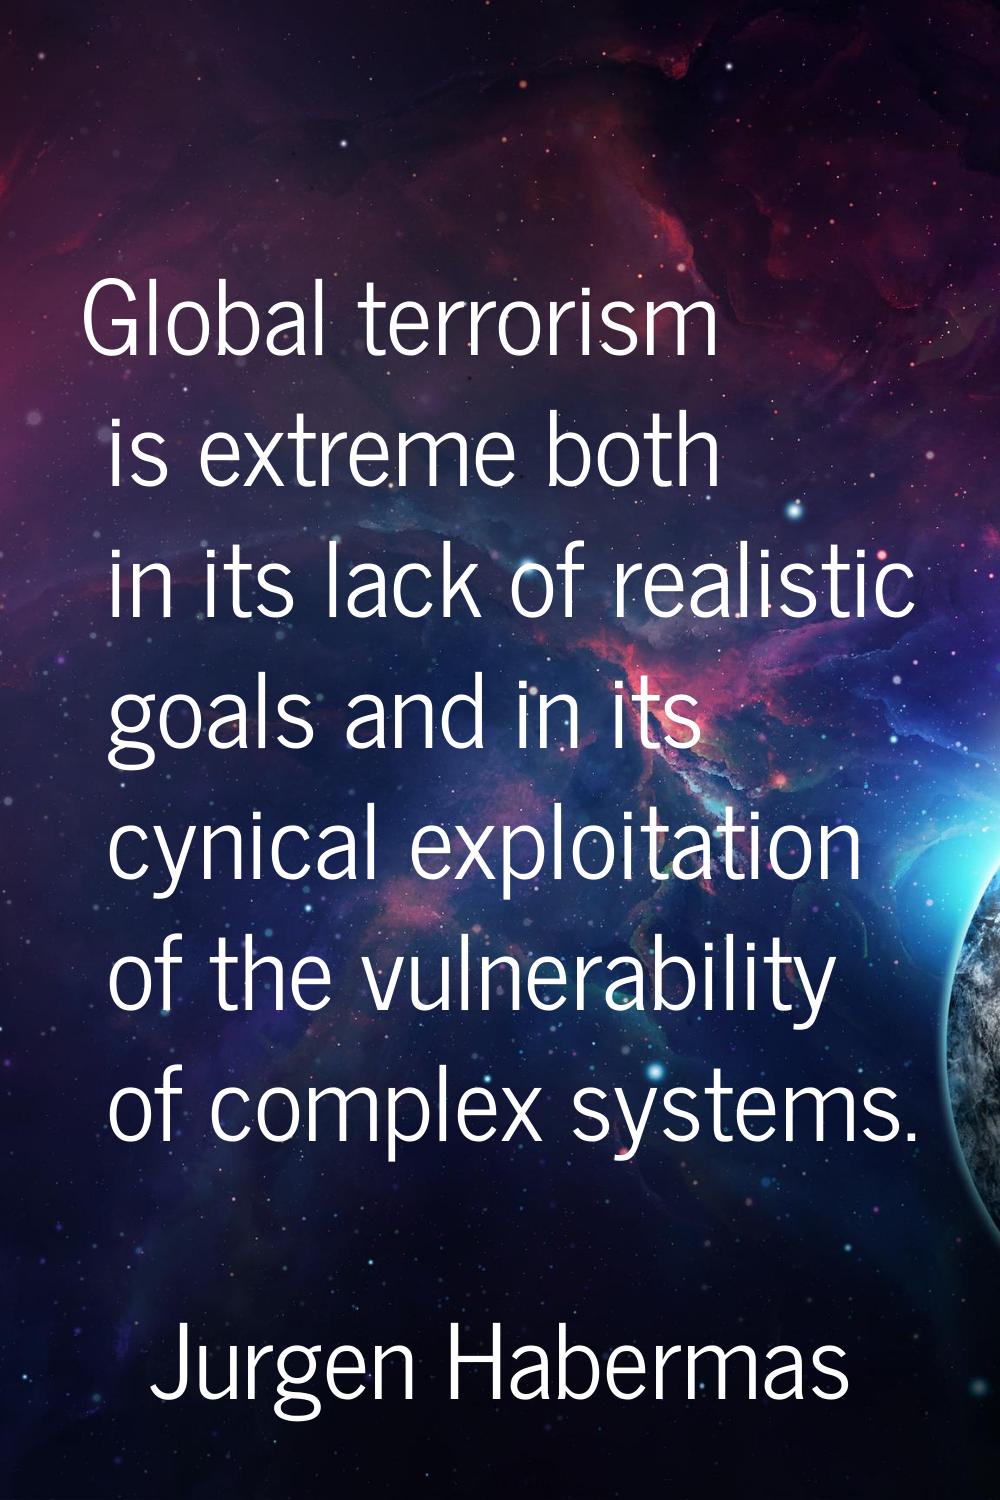 Global terrorism is extreme both in its lack of realistic goals and in its cynical exploitation of 